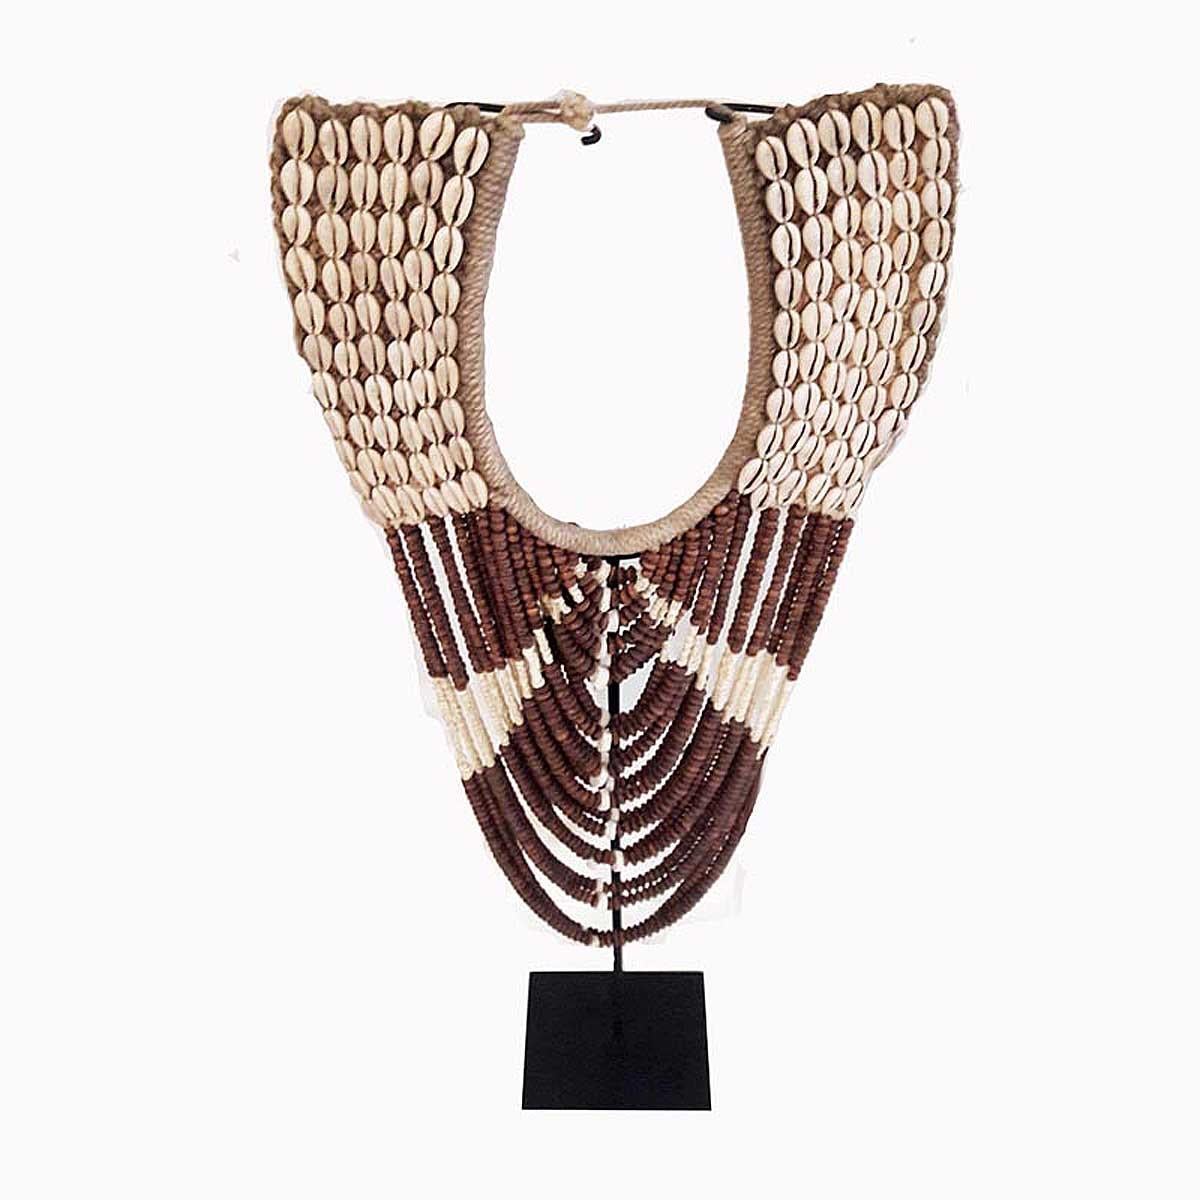 A decorative necklace handcrafted in Bali, mounted on a black metal stand. Puka shell and wood beads, combined with Money Cowry shells and intricately applied on a thick cotton woven canvas.